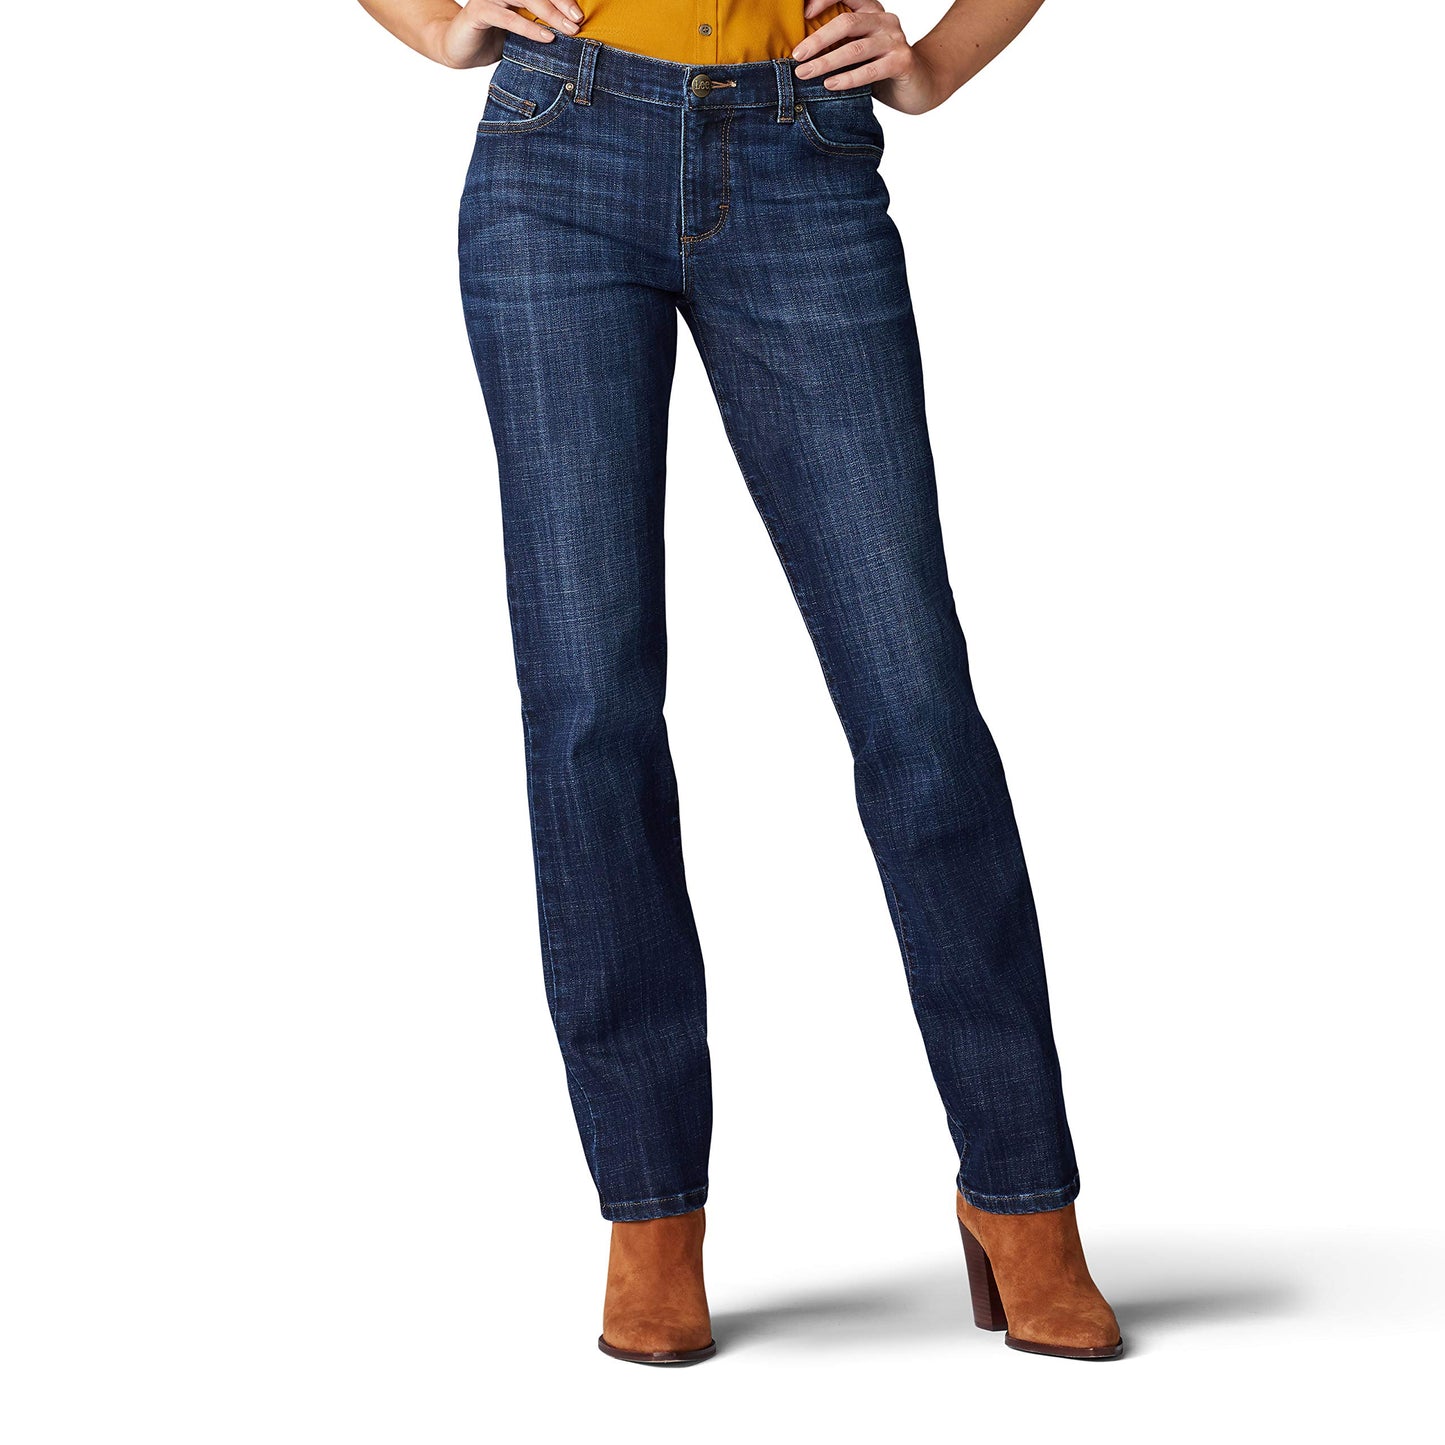 Lee Women's Relaxed Fit Straight Leg Jean, Bewitched, 12